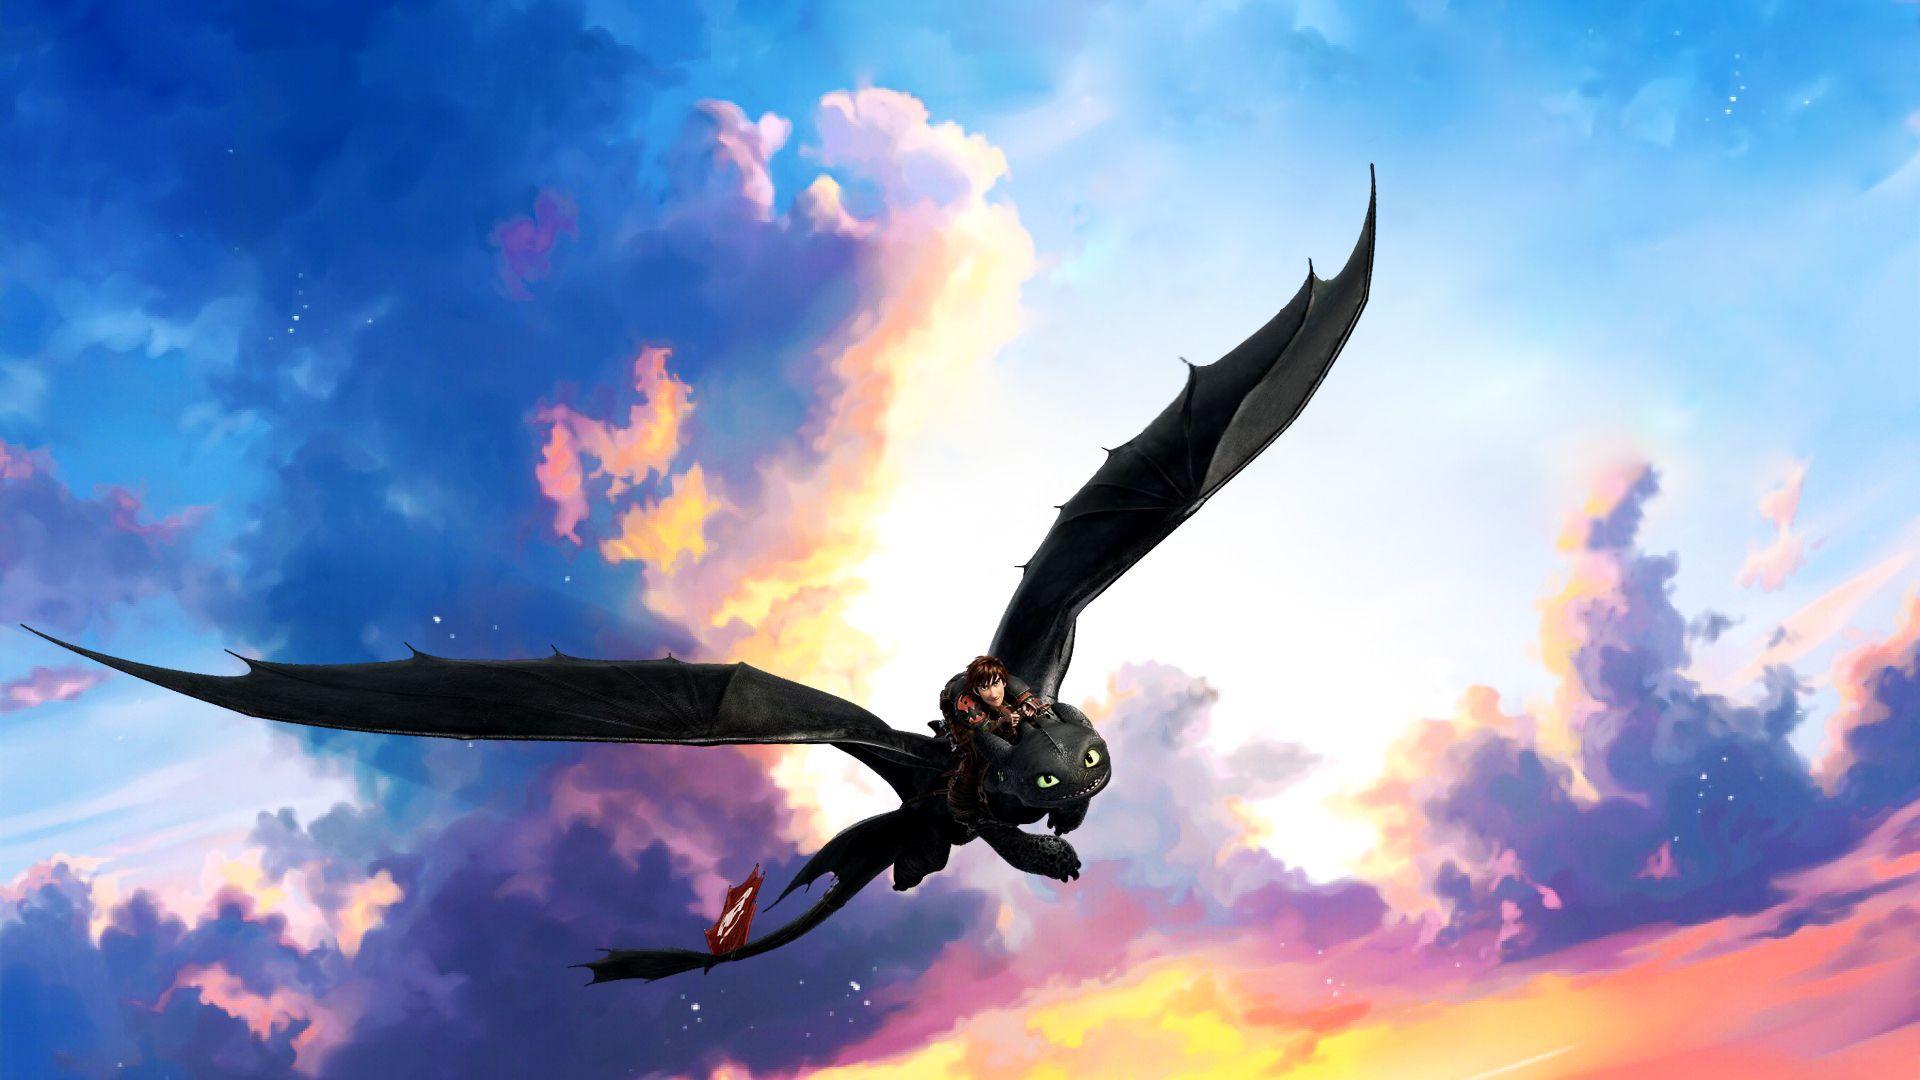 HTTYD wallpaper by StormBringer872  Download on ZEDGE  6e5e